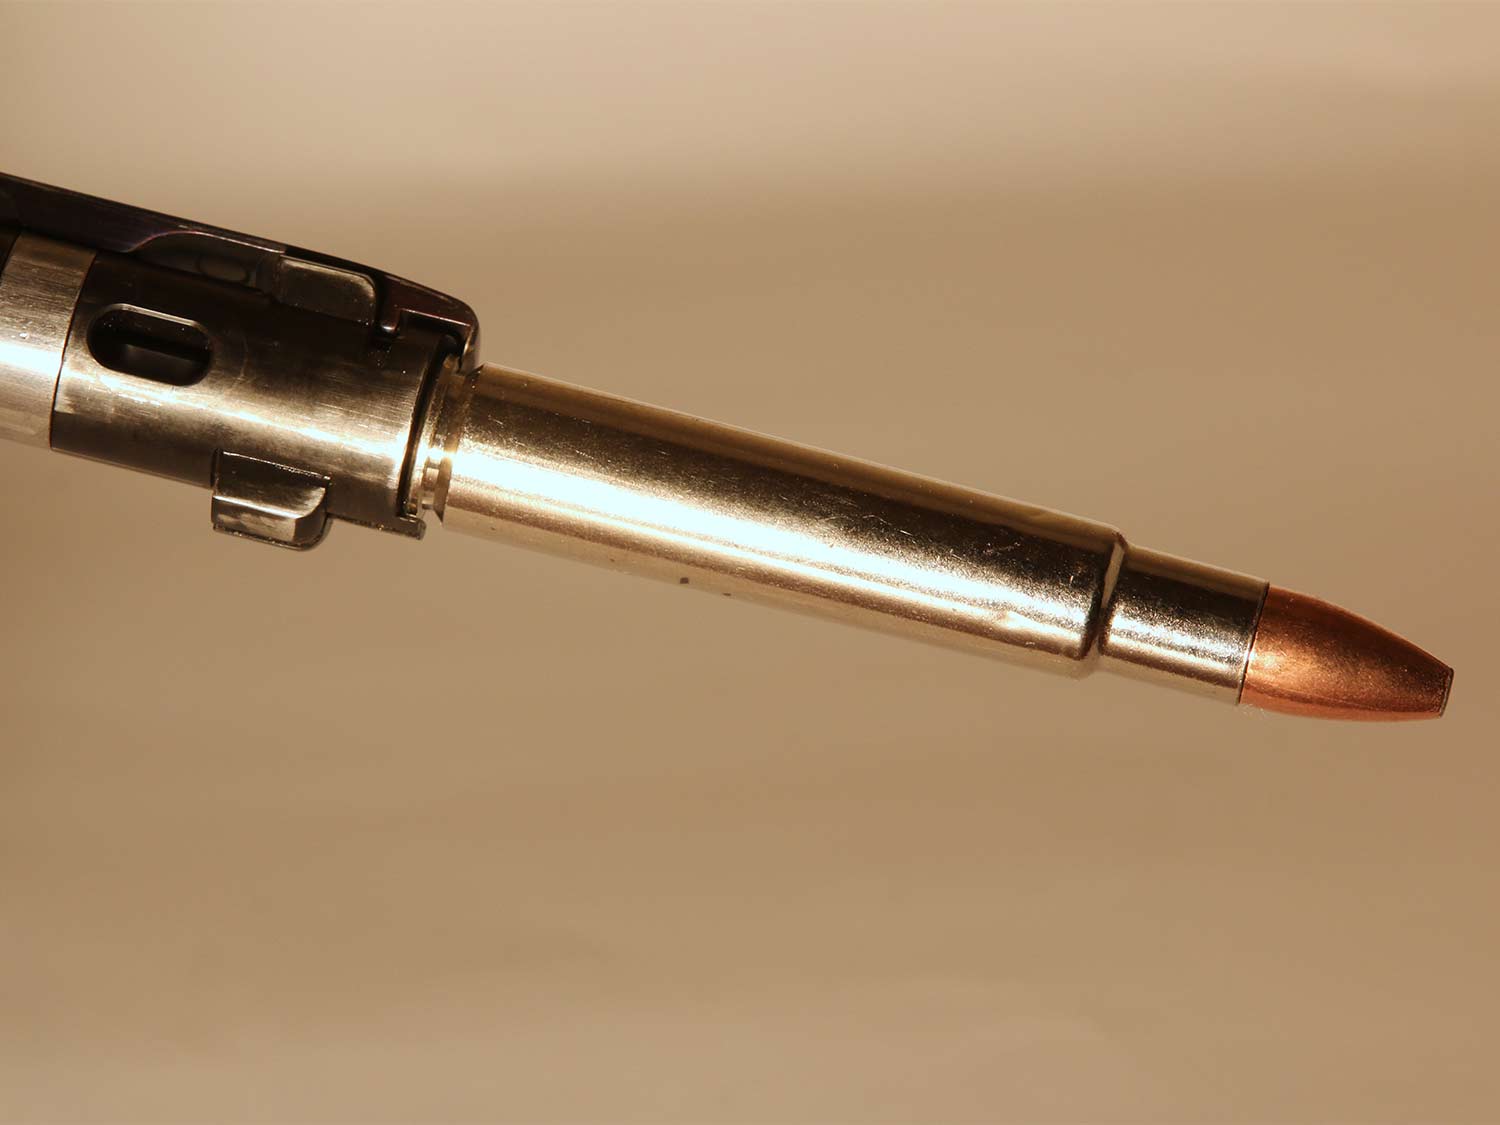 A Mauser bolt removed from a rifle holds a cartridge with grips.